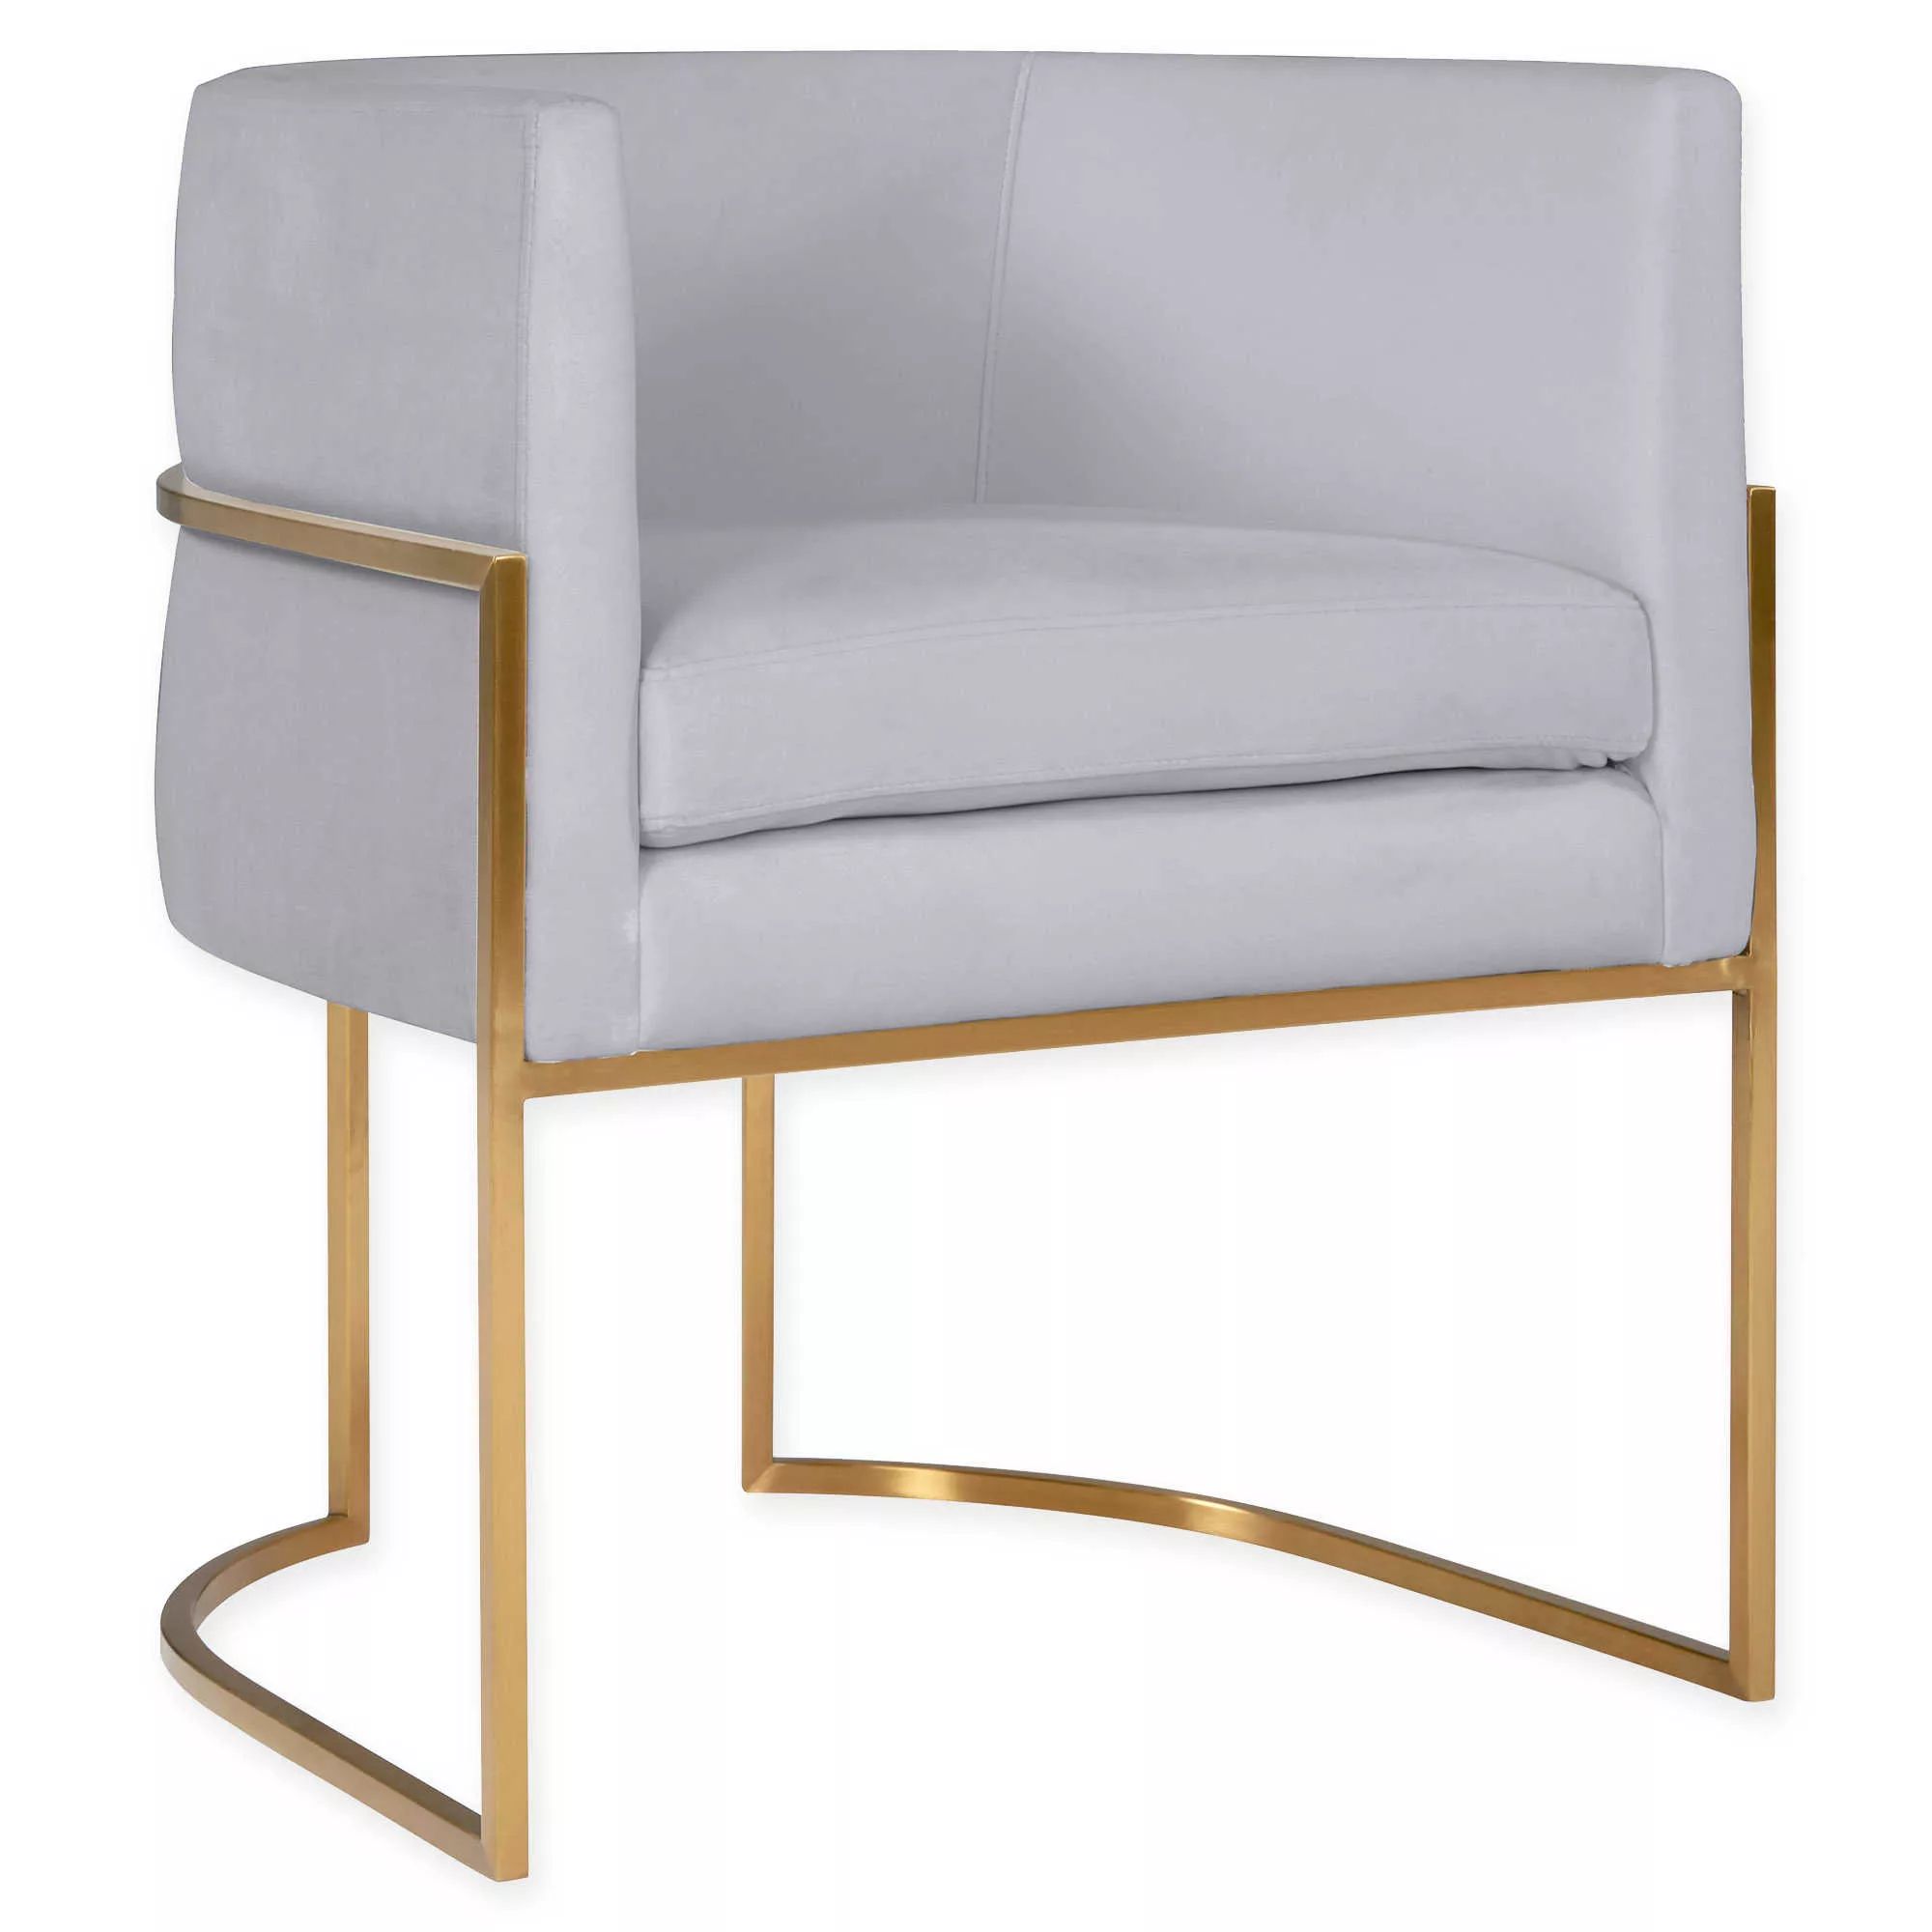 Inspire Me! Home D&eacute;cor by TOV -Giselle Velvet Upholstered Dining Chair | Bed Bath & Beyond | Bed Bath & Beyond